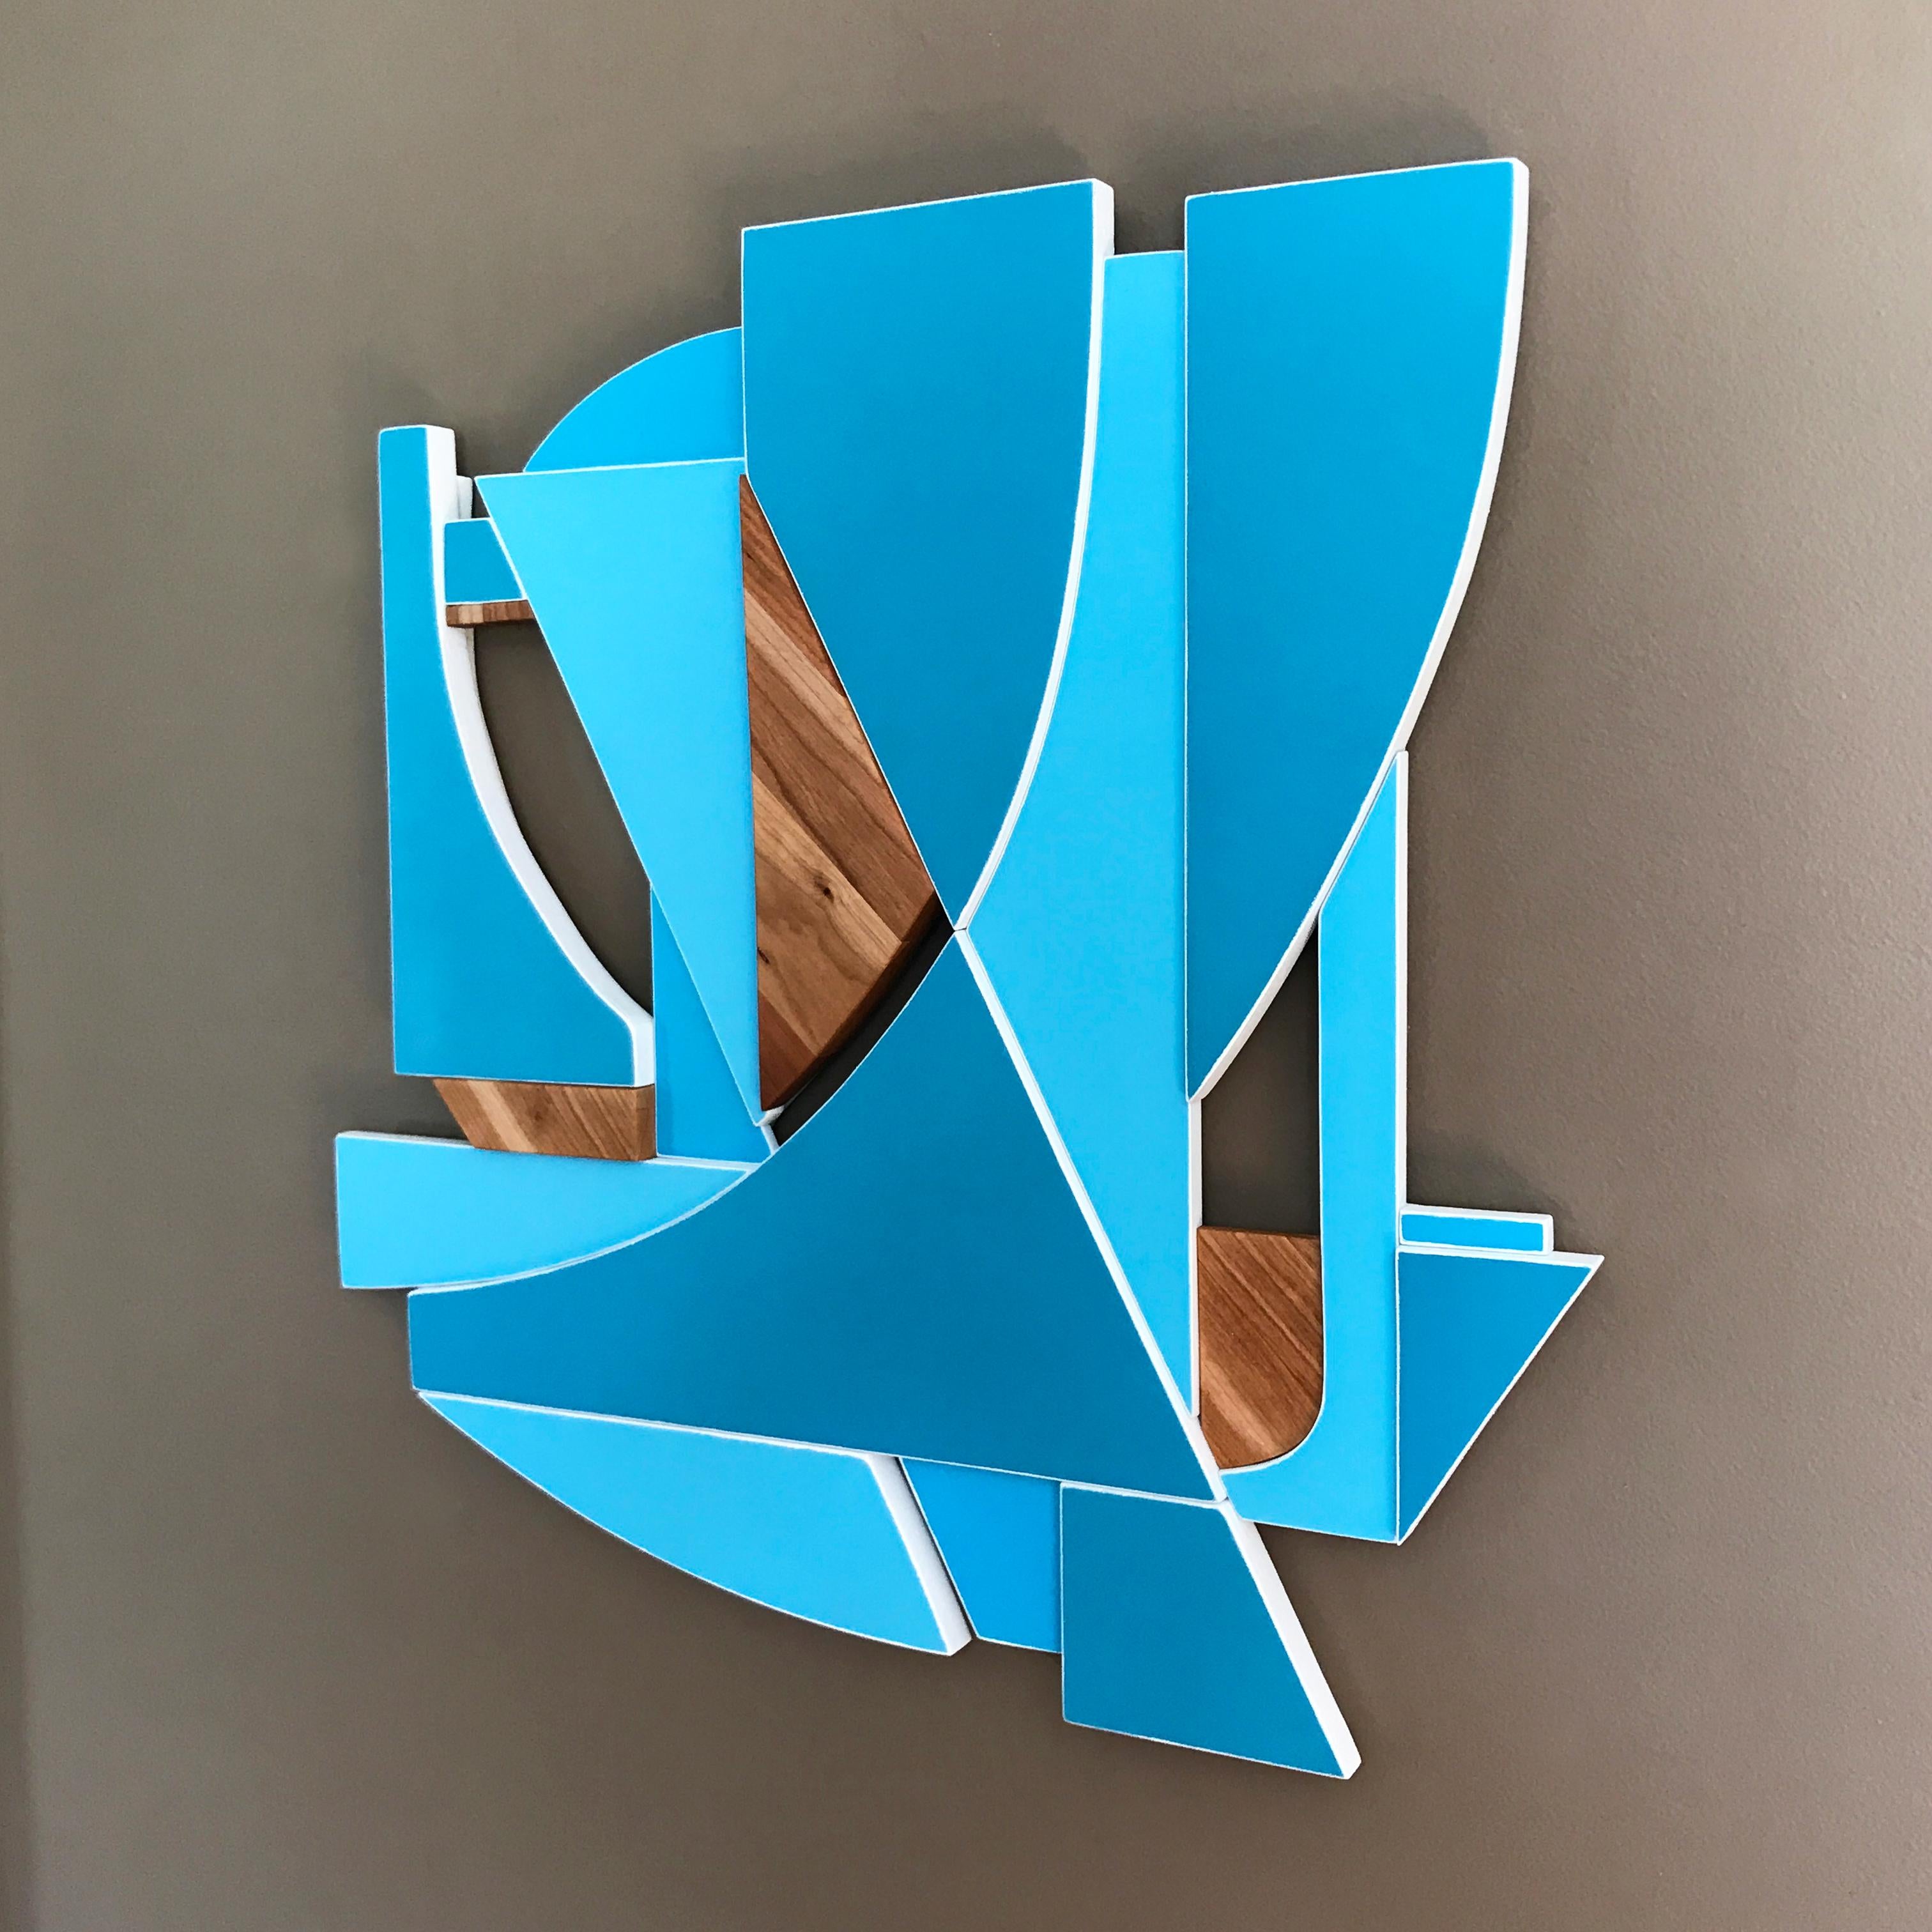 

Spinnaker is a modern mixed media wall sculpture. Made from acrylic, cherry wood and MDF. The limited but bright and vivid monochrome color palette emphasizes form and composition. I designed this piece to be somewhat reminiscent of past